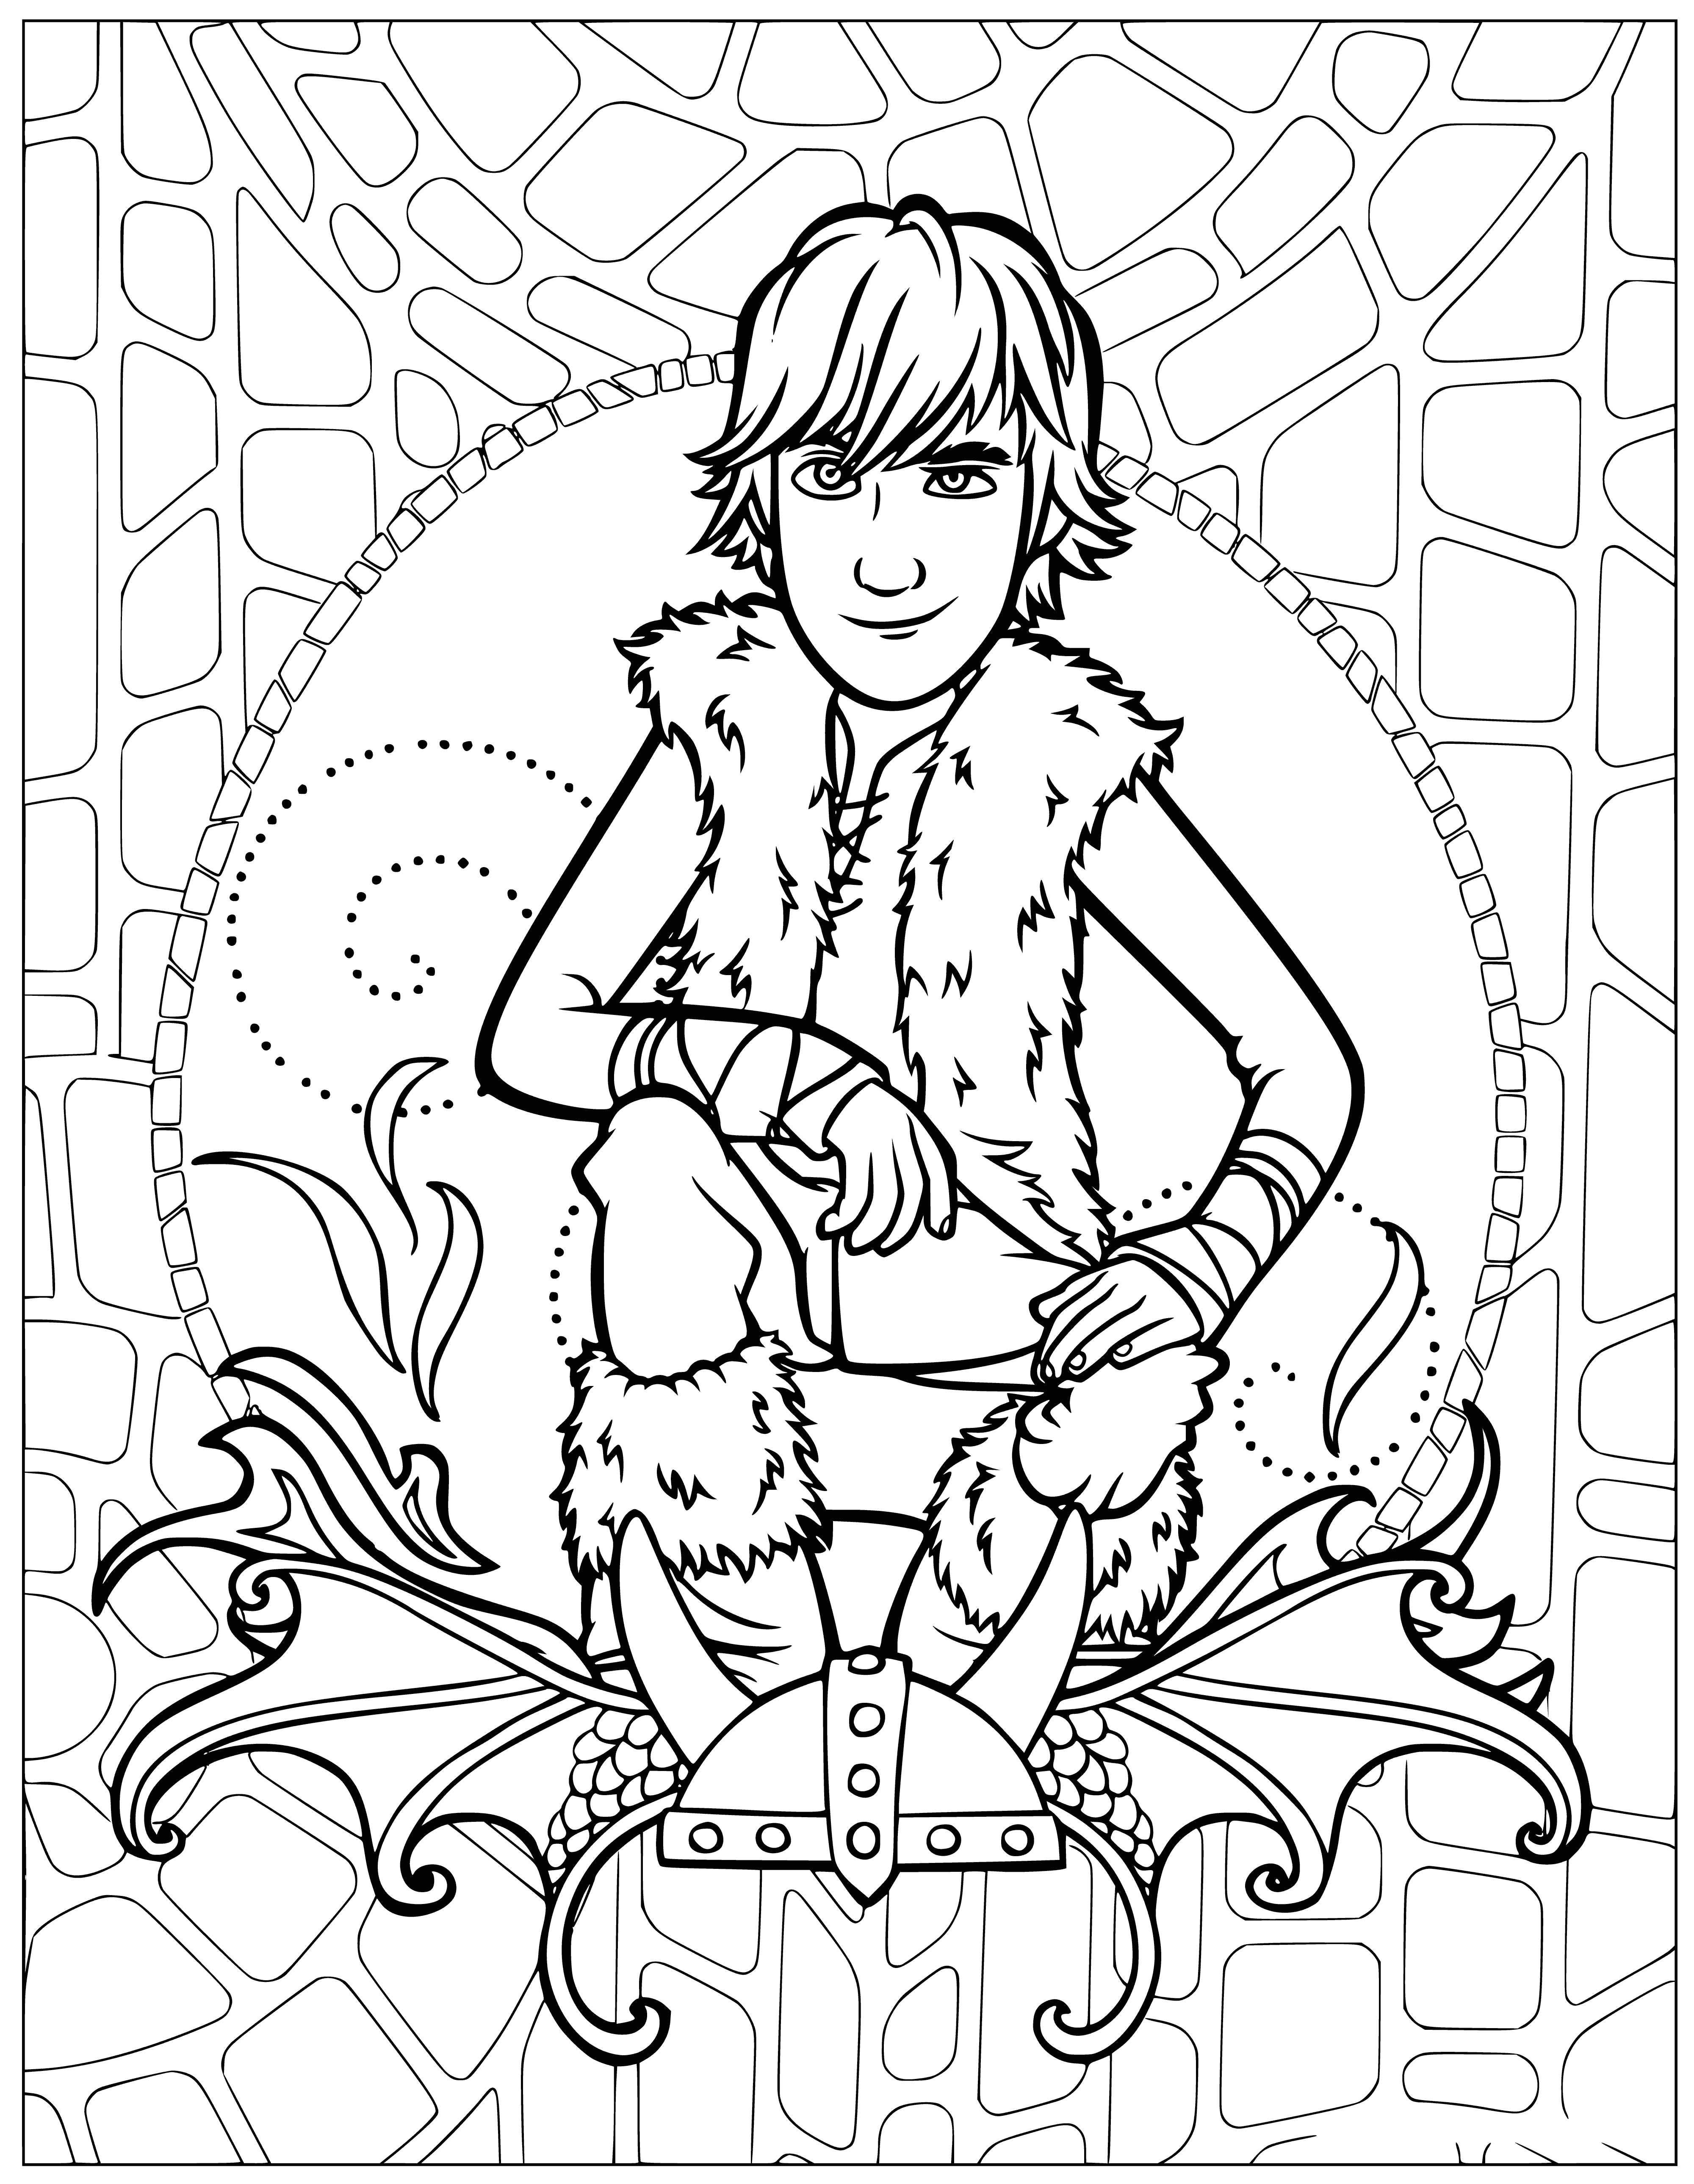 coloring page: Teenage Hiccup stands on a rocky ledge, admiring dragons in the distance with a knife and belt at his waist.